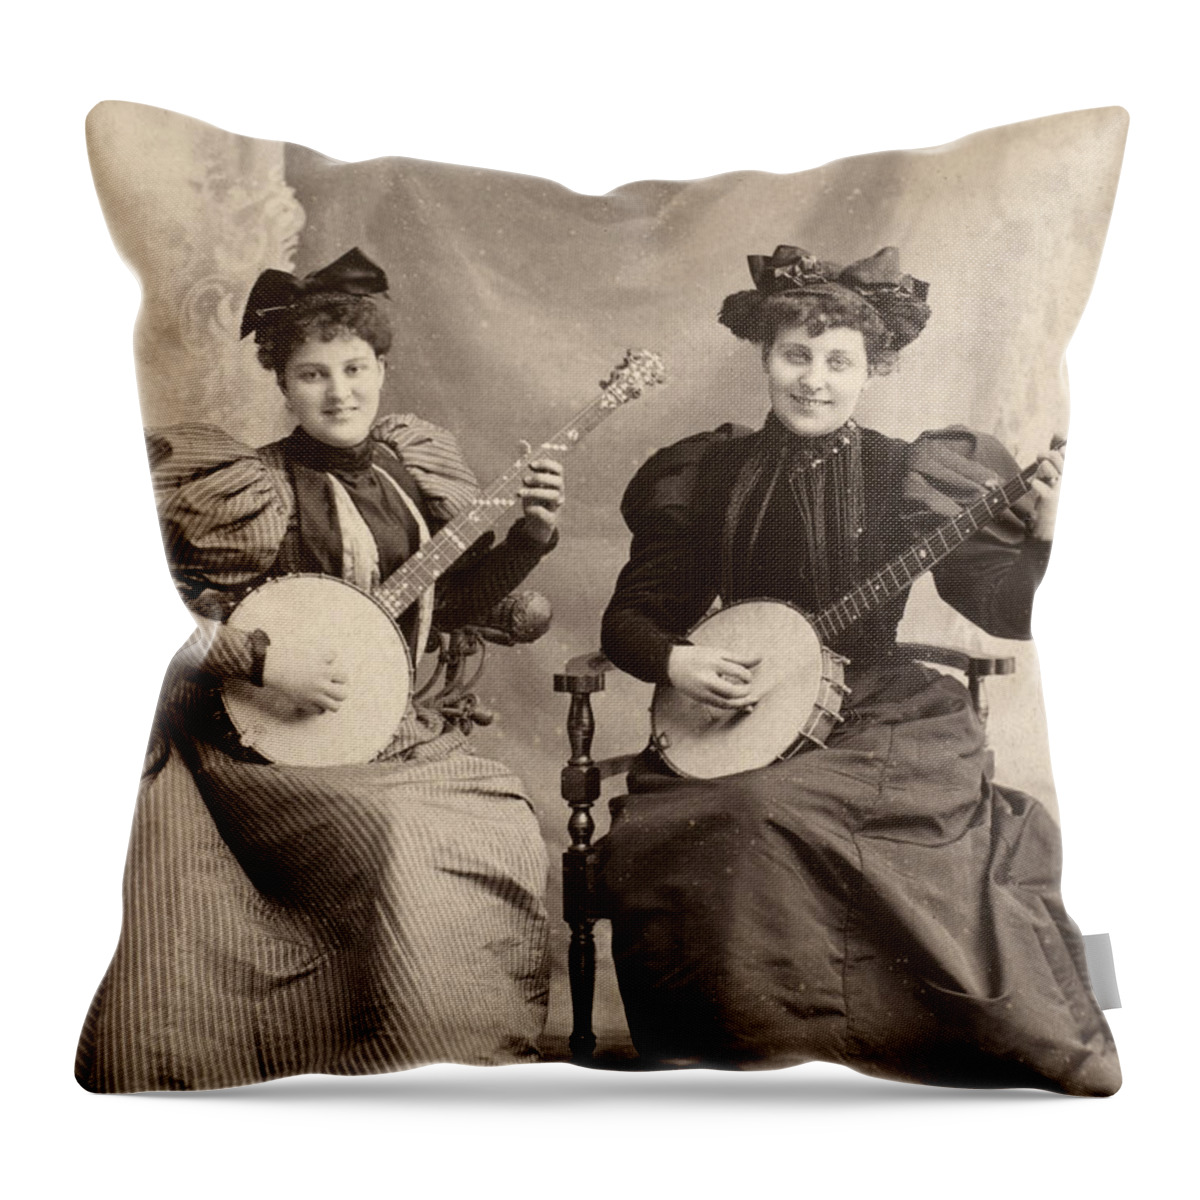 1900 Throw Pillow featuring the photograph BANJO PLAYERS, c1900 by Granger